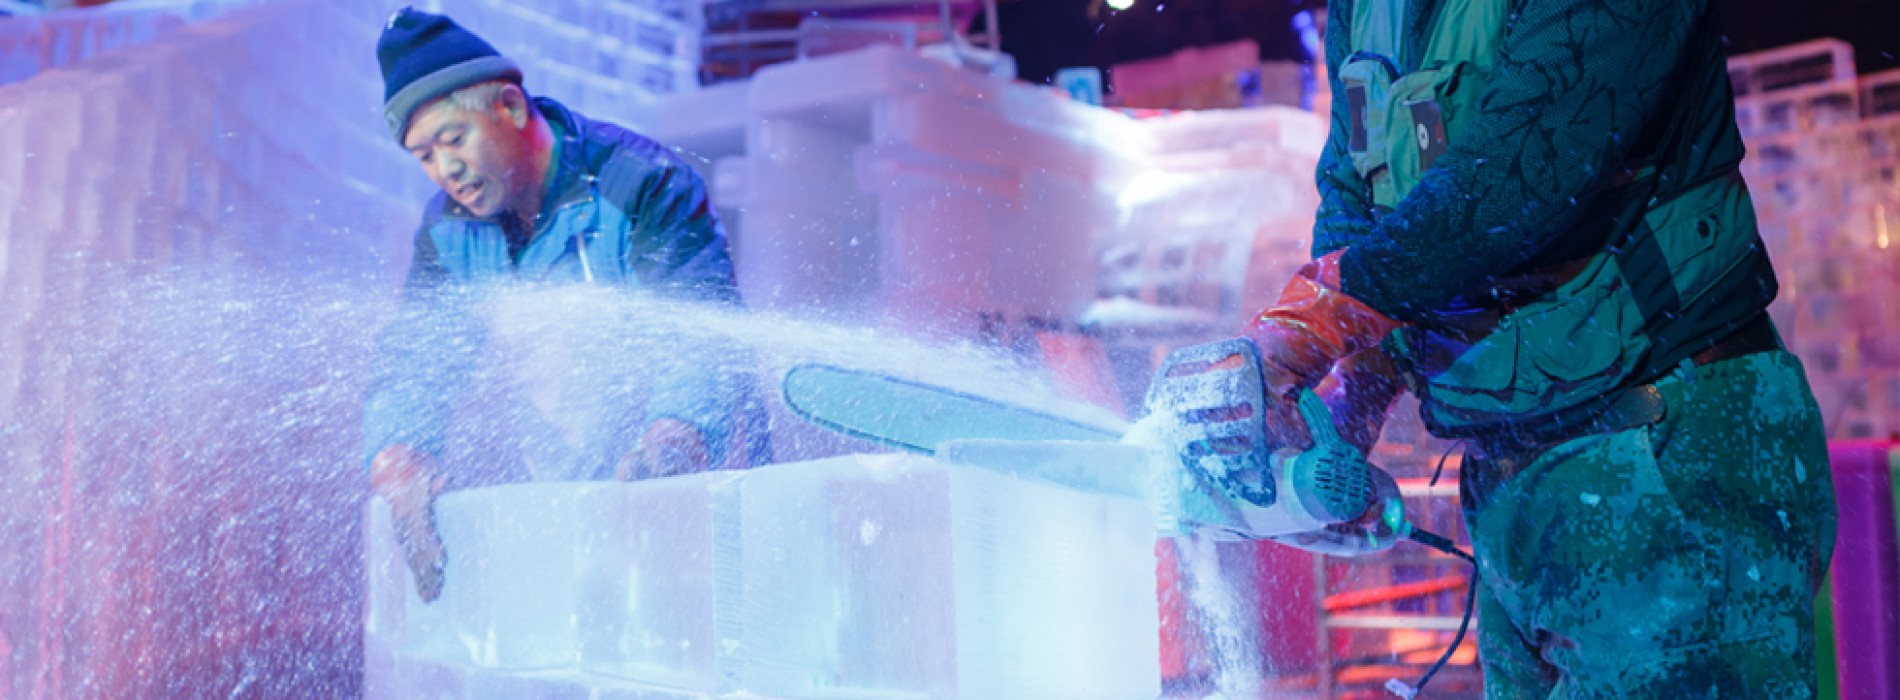 Kung Fu Panda Adventure Ice World with the DreamWorks All-Stars returns to The Venetian Macao